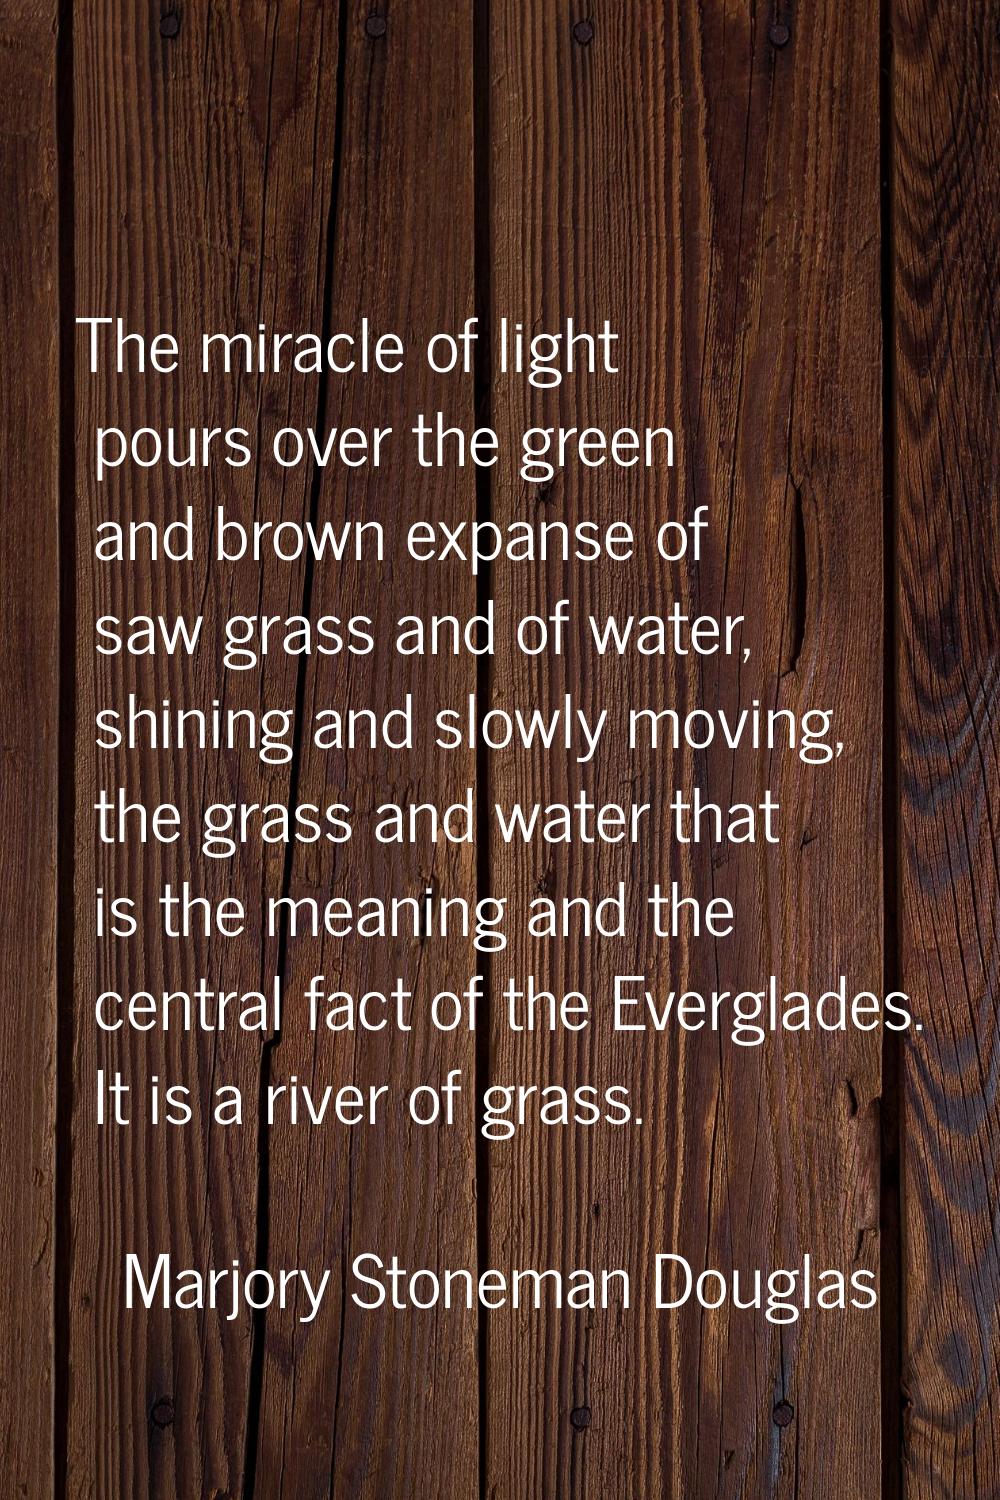 The miracle of light pours over the green and brown expanse of saw grass and of water, shining and 